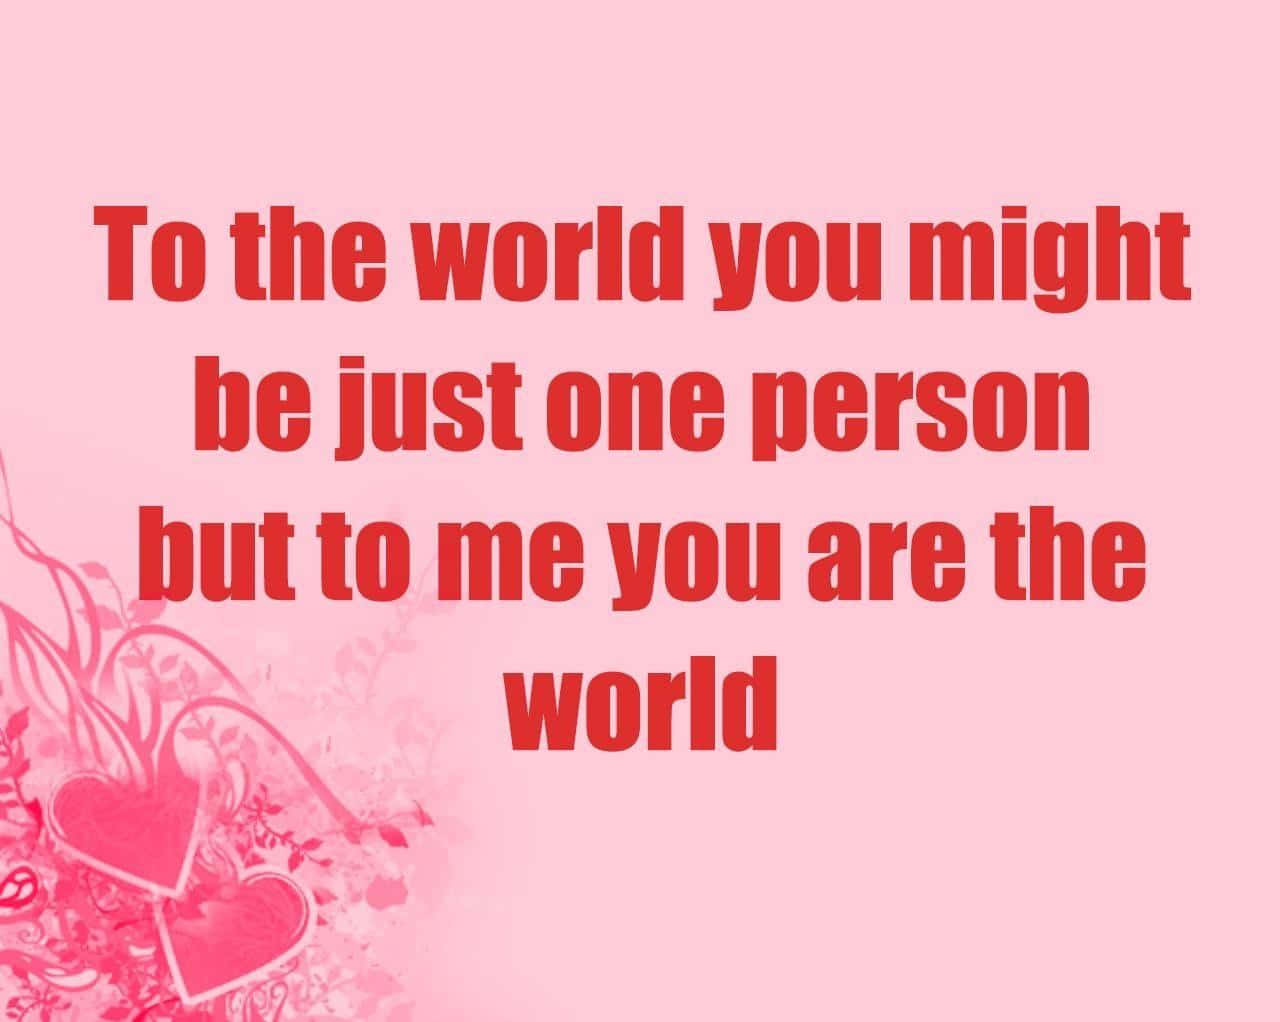 A Pink Background With The Words To The World Might Just Be One Person But To Me You Are The World